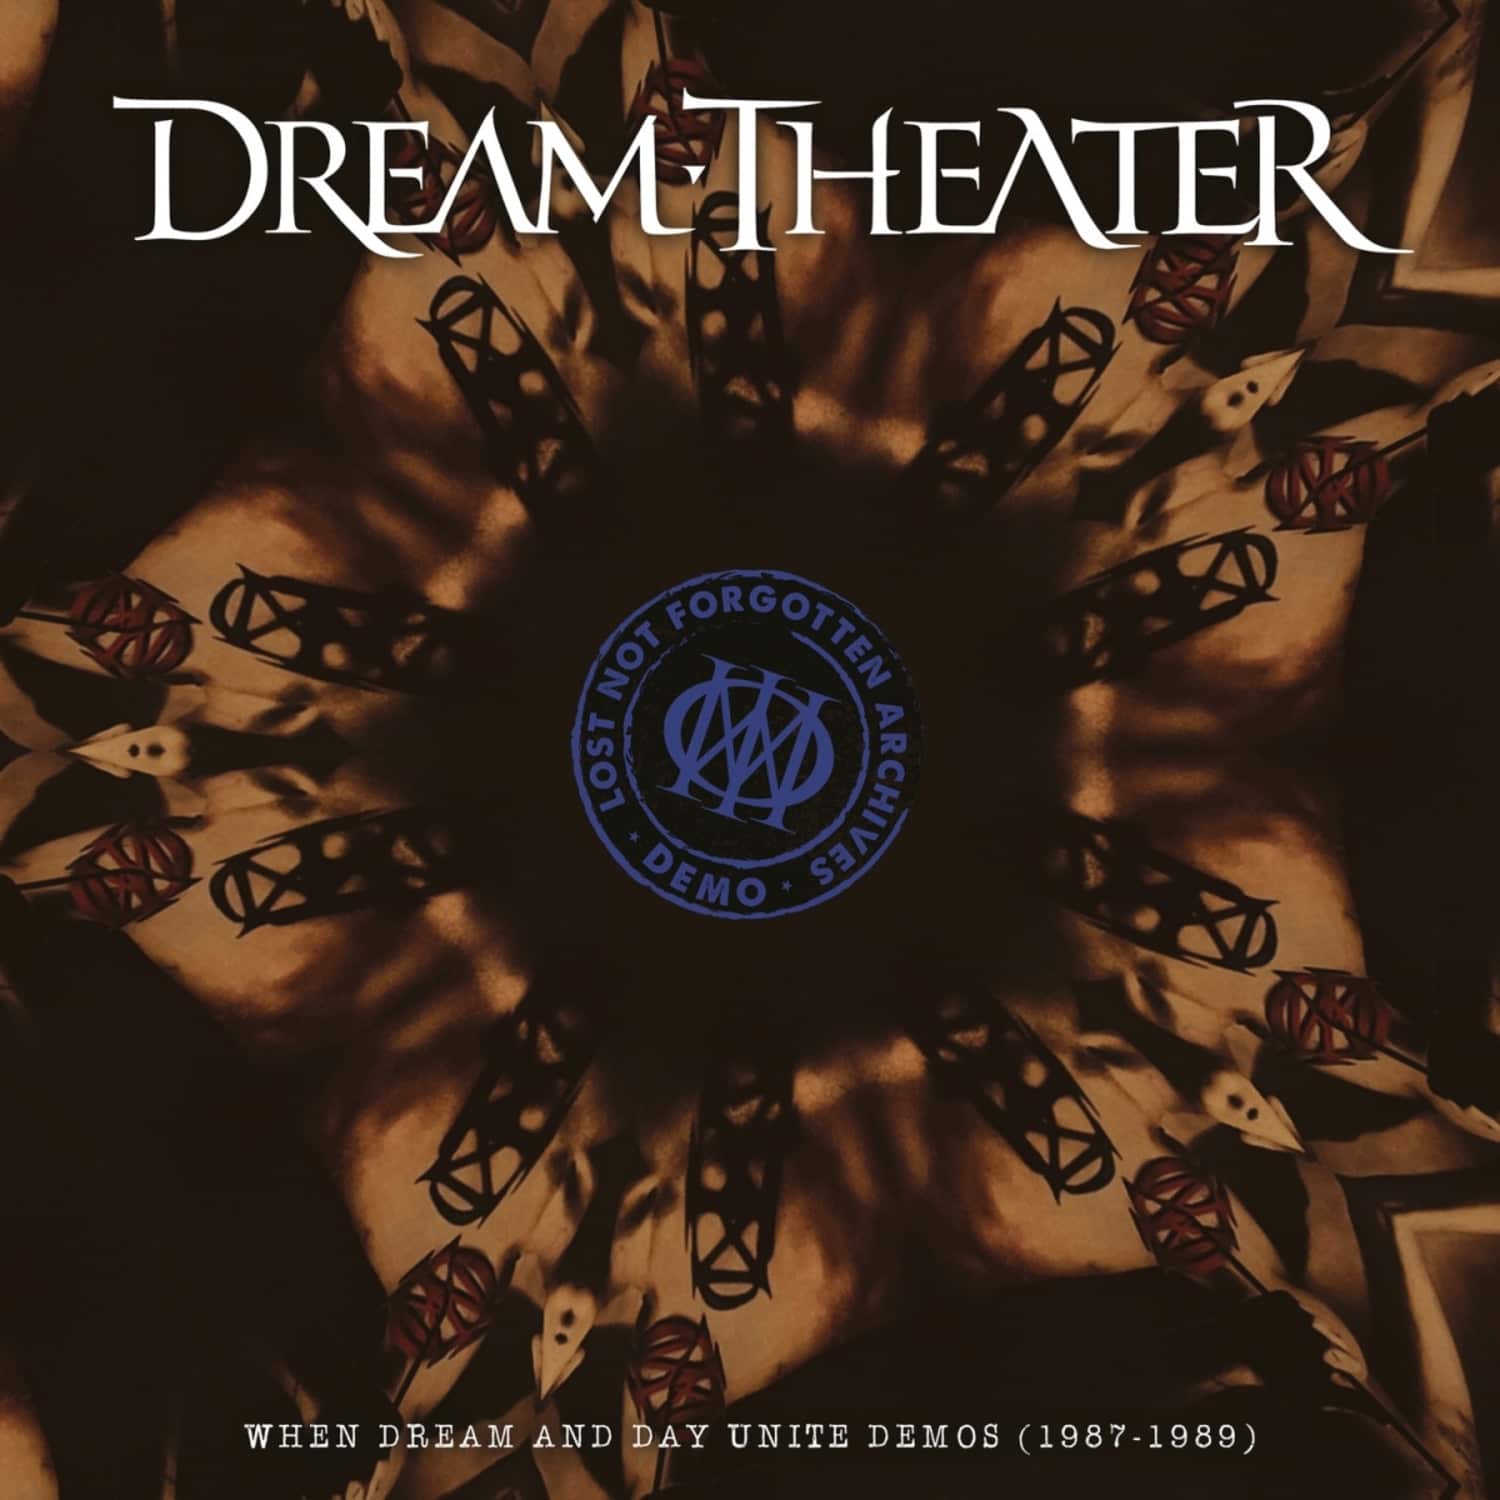 Dream Theater - LOST NOT FORGOTTEN ARCHIVES: WHEN DREAM AND DAY UN